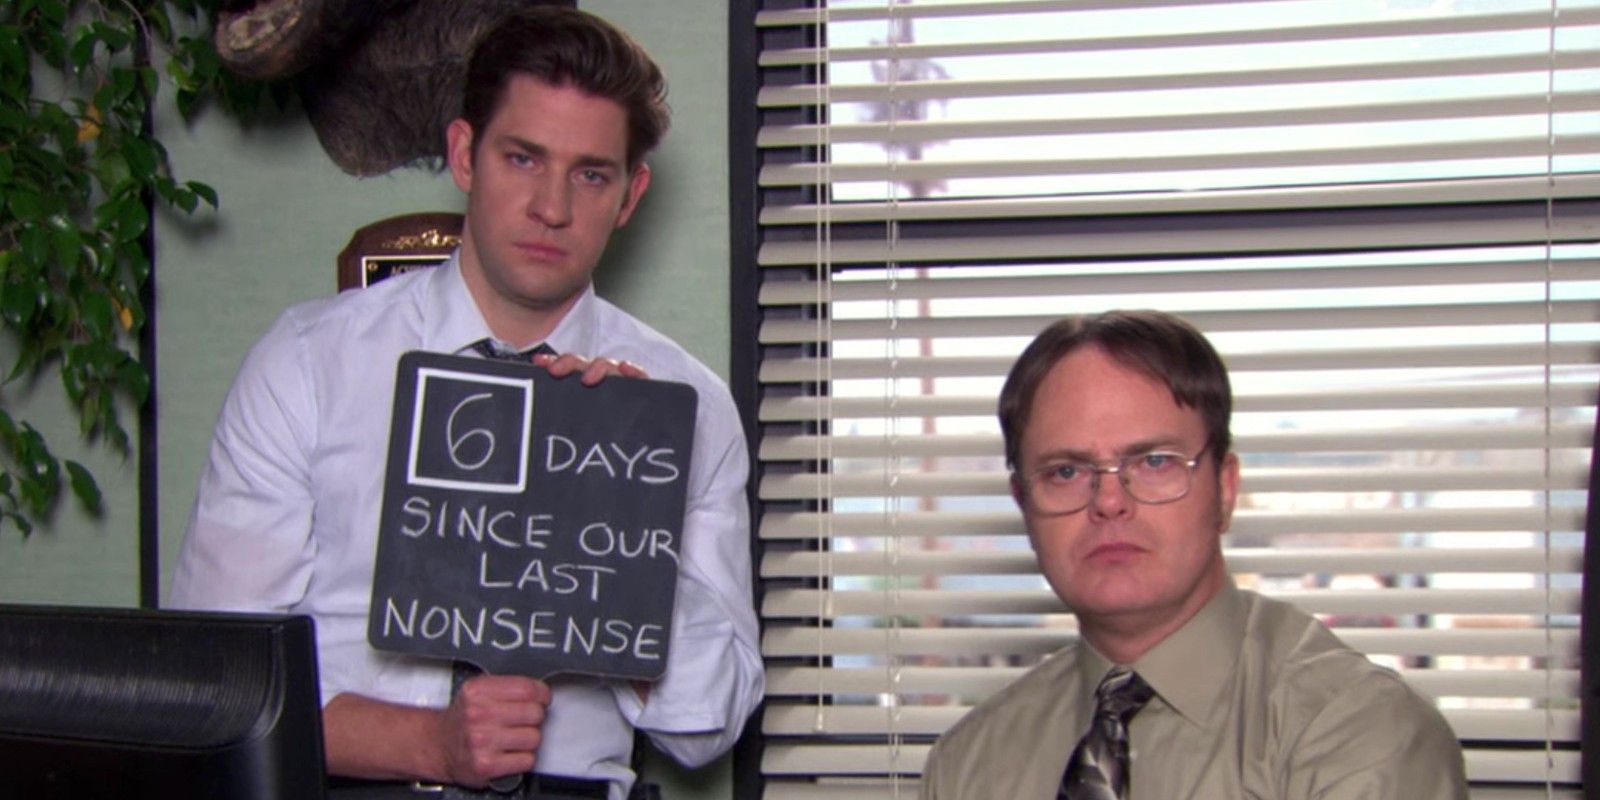 Jim and Dwight posing in The Office together